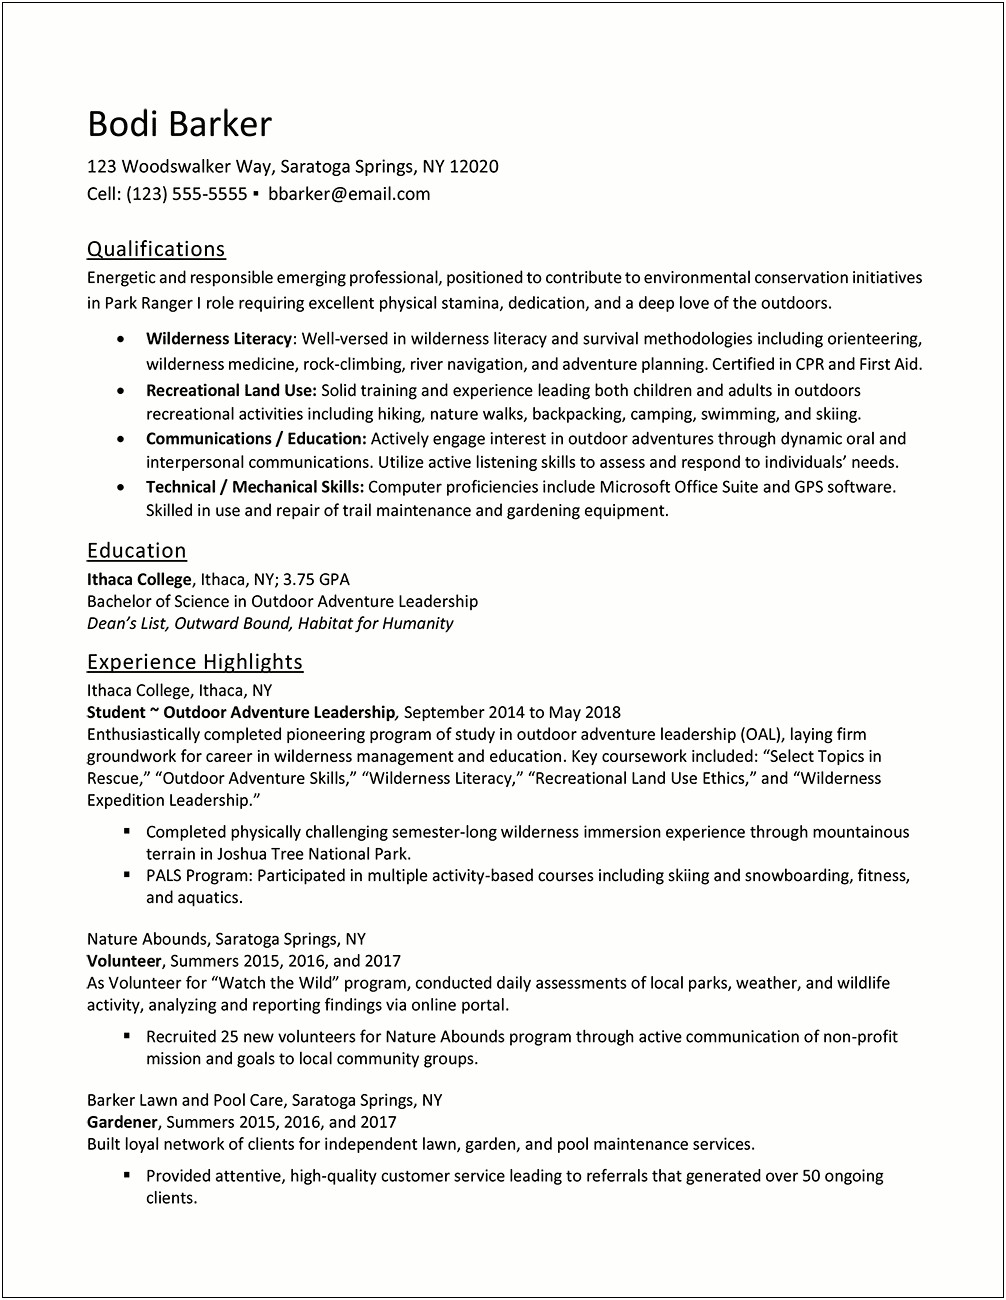 Best Resume For Computer Science Entry Level